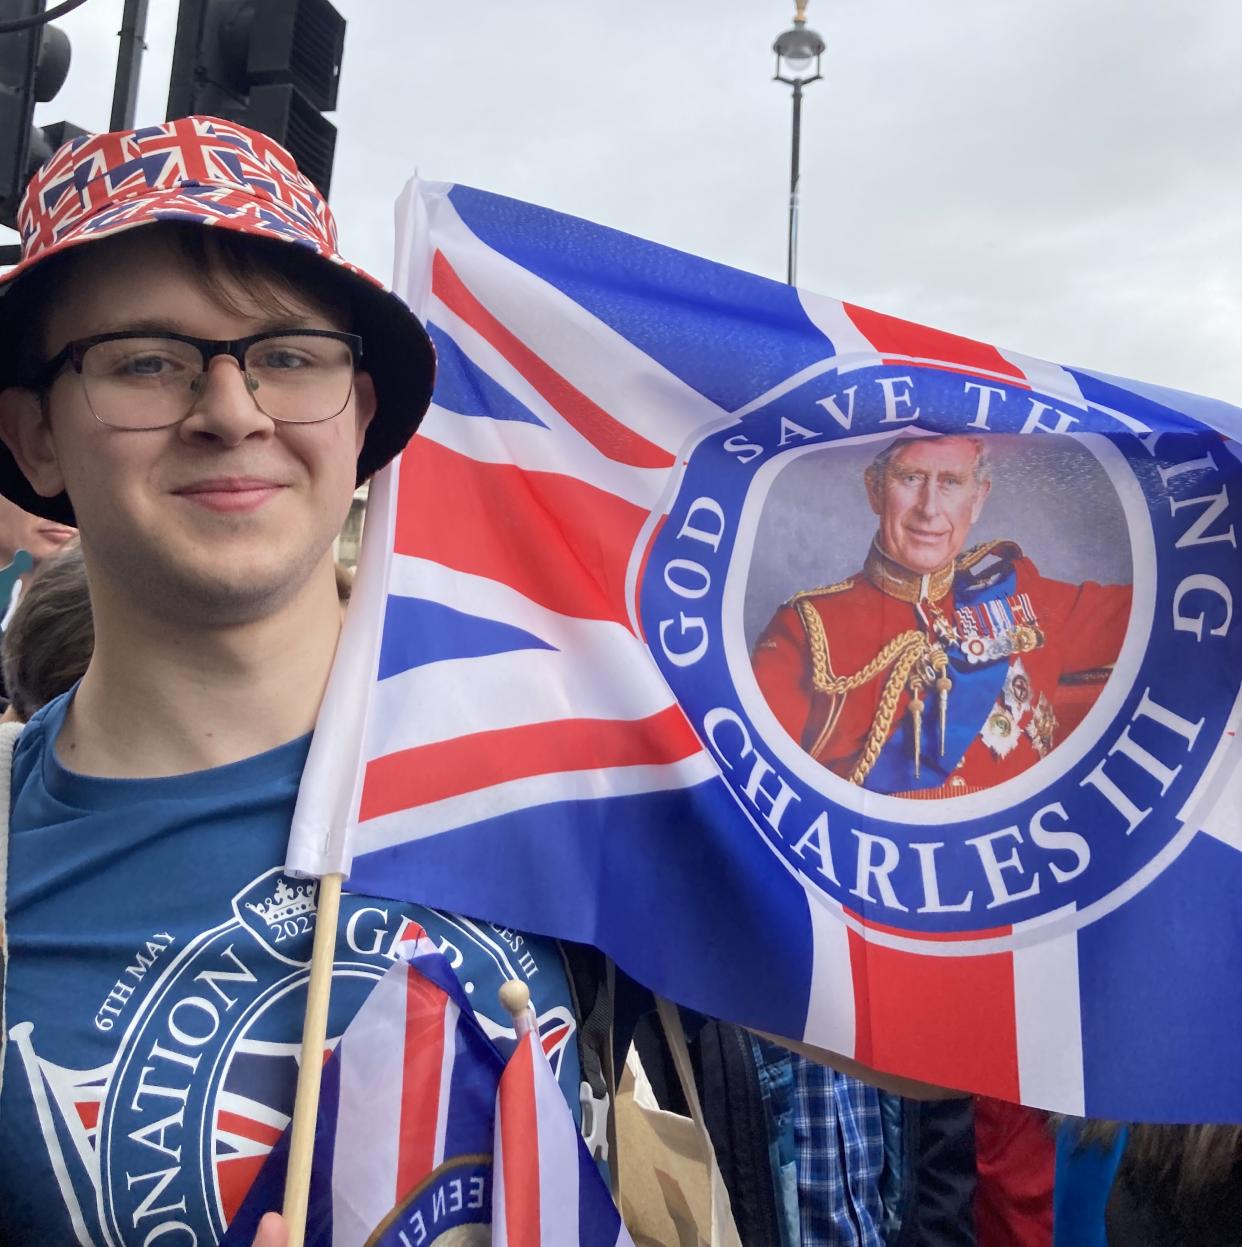 Sam Keen, from Hertfordshire was hoping to catch a glimpse of his favourite Royal – Princess Anne. (Yahoo Life UK)